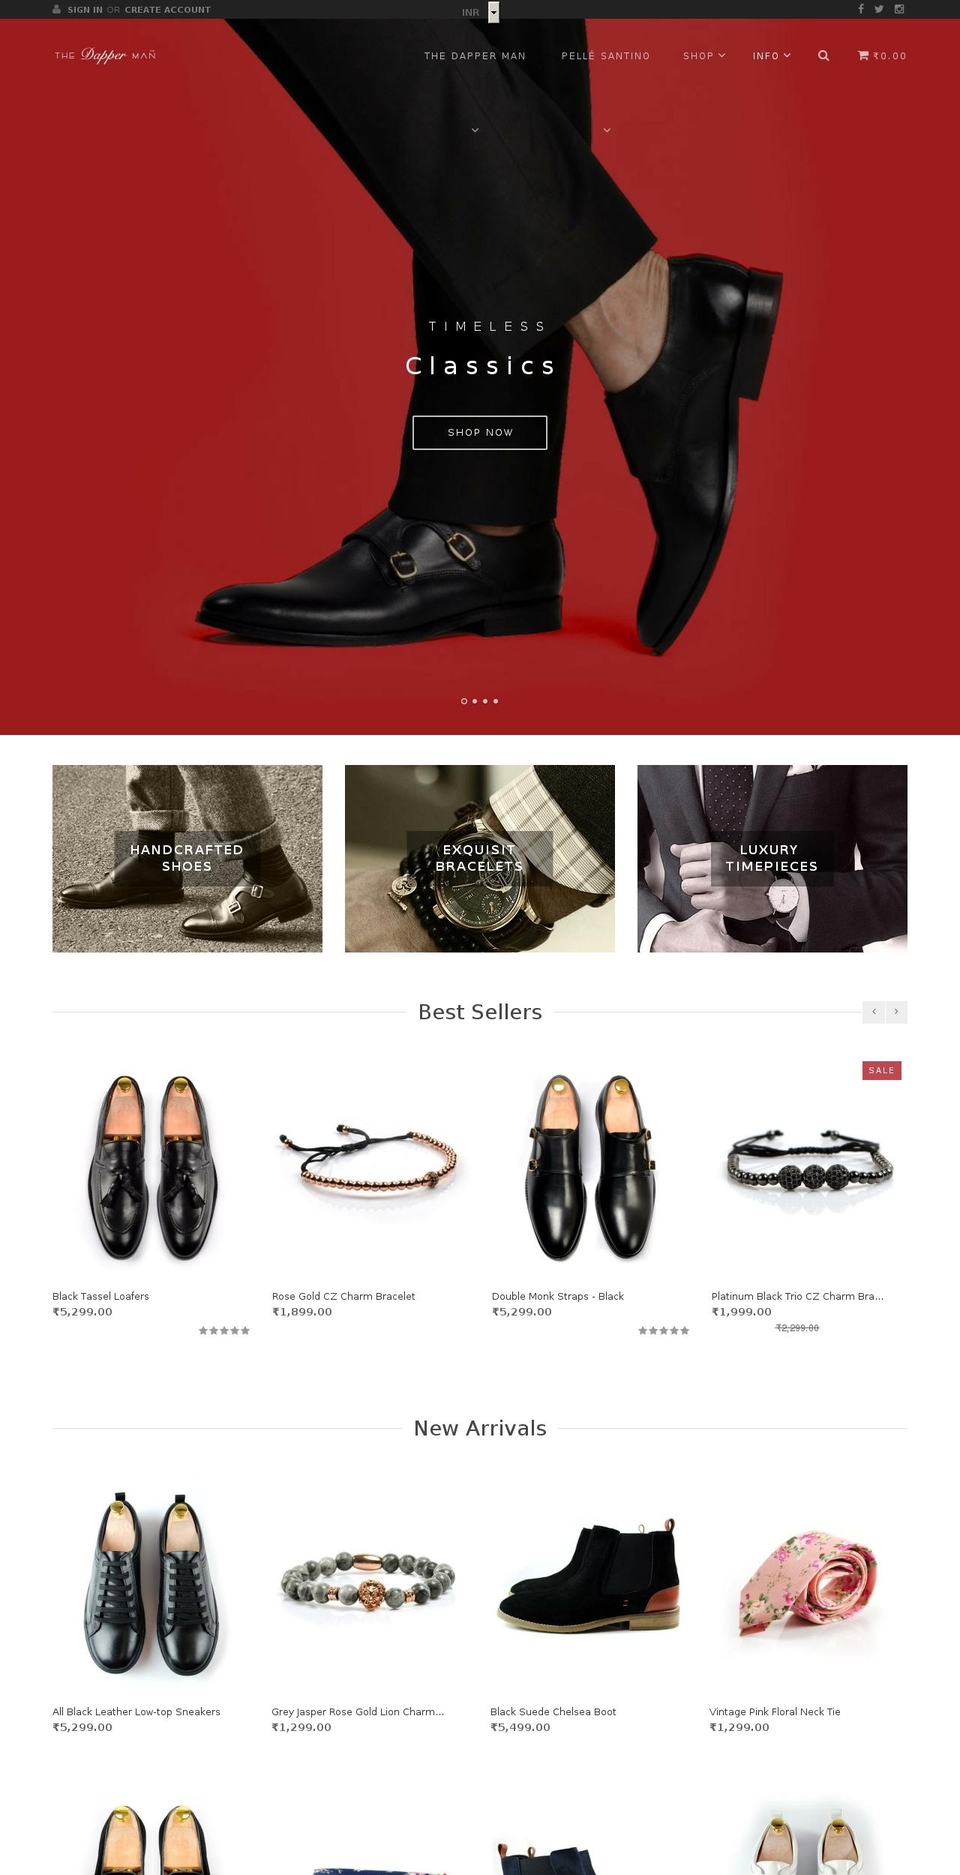 thedapperman.in shopify website screenshot